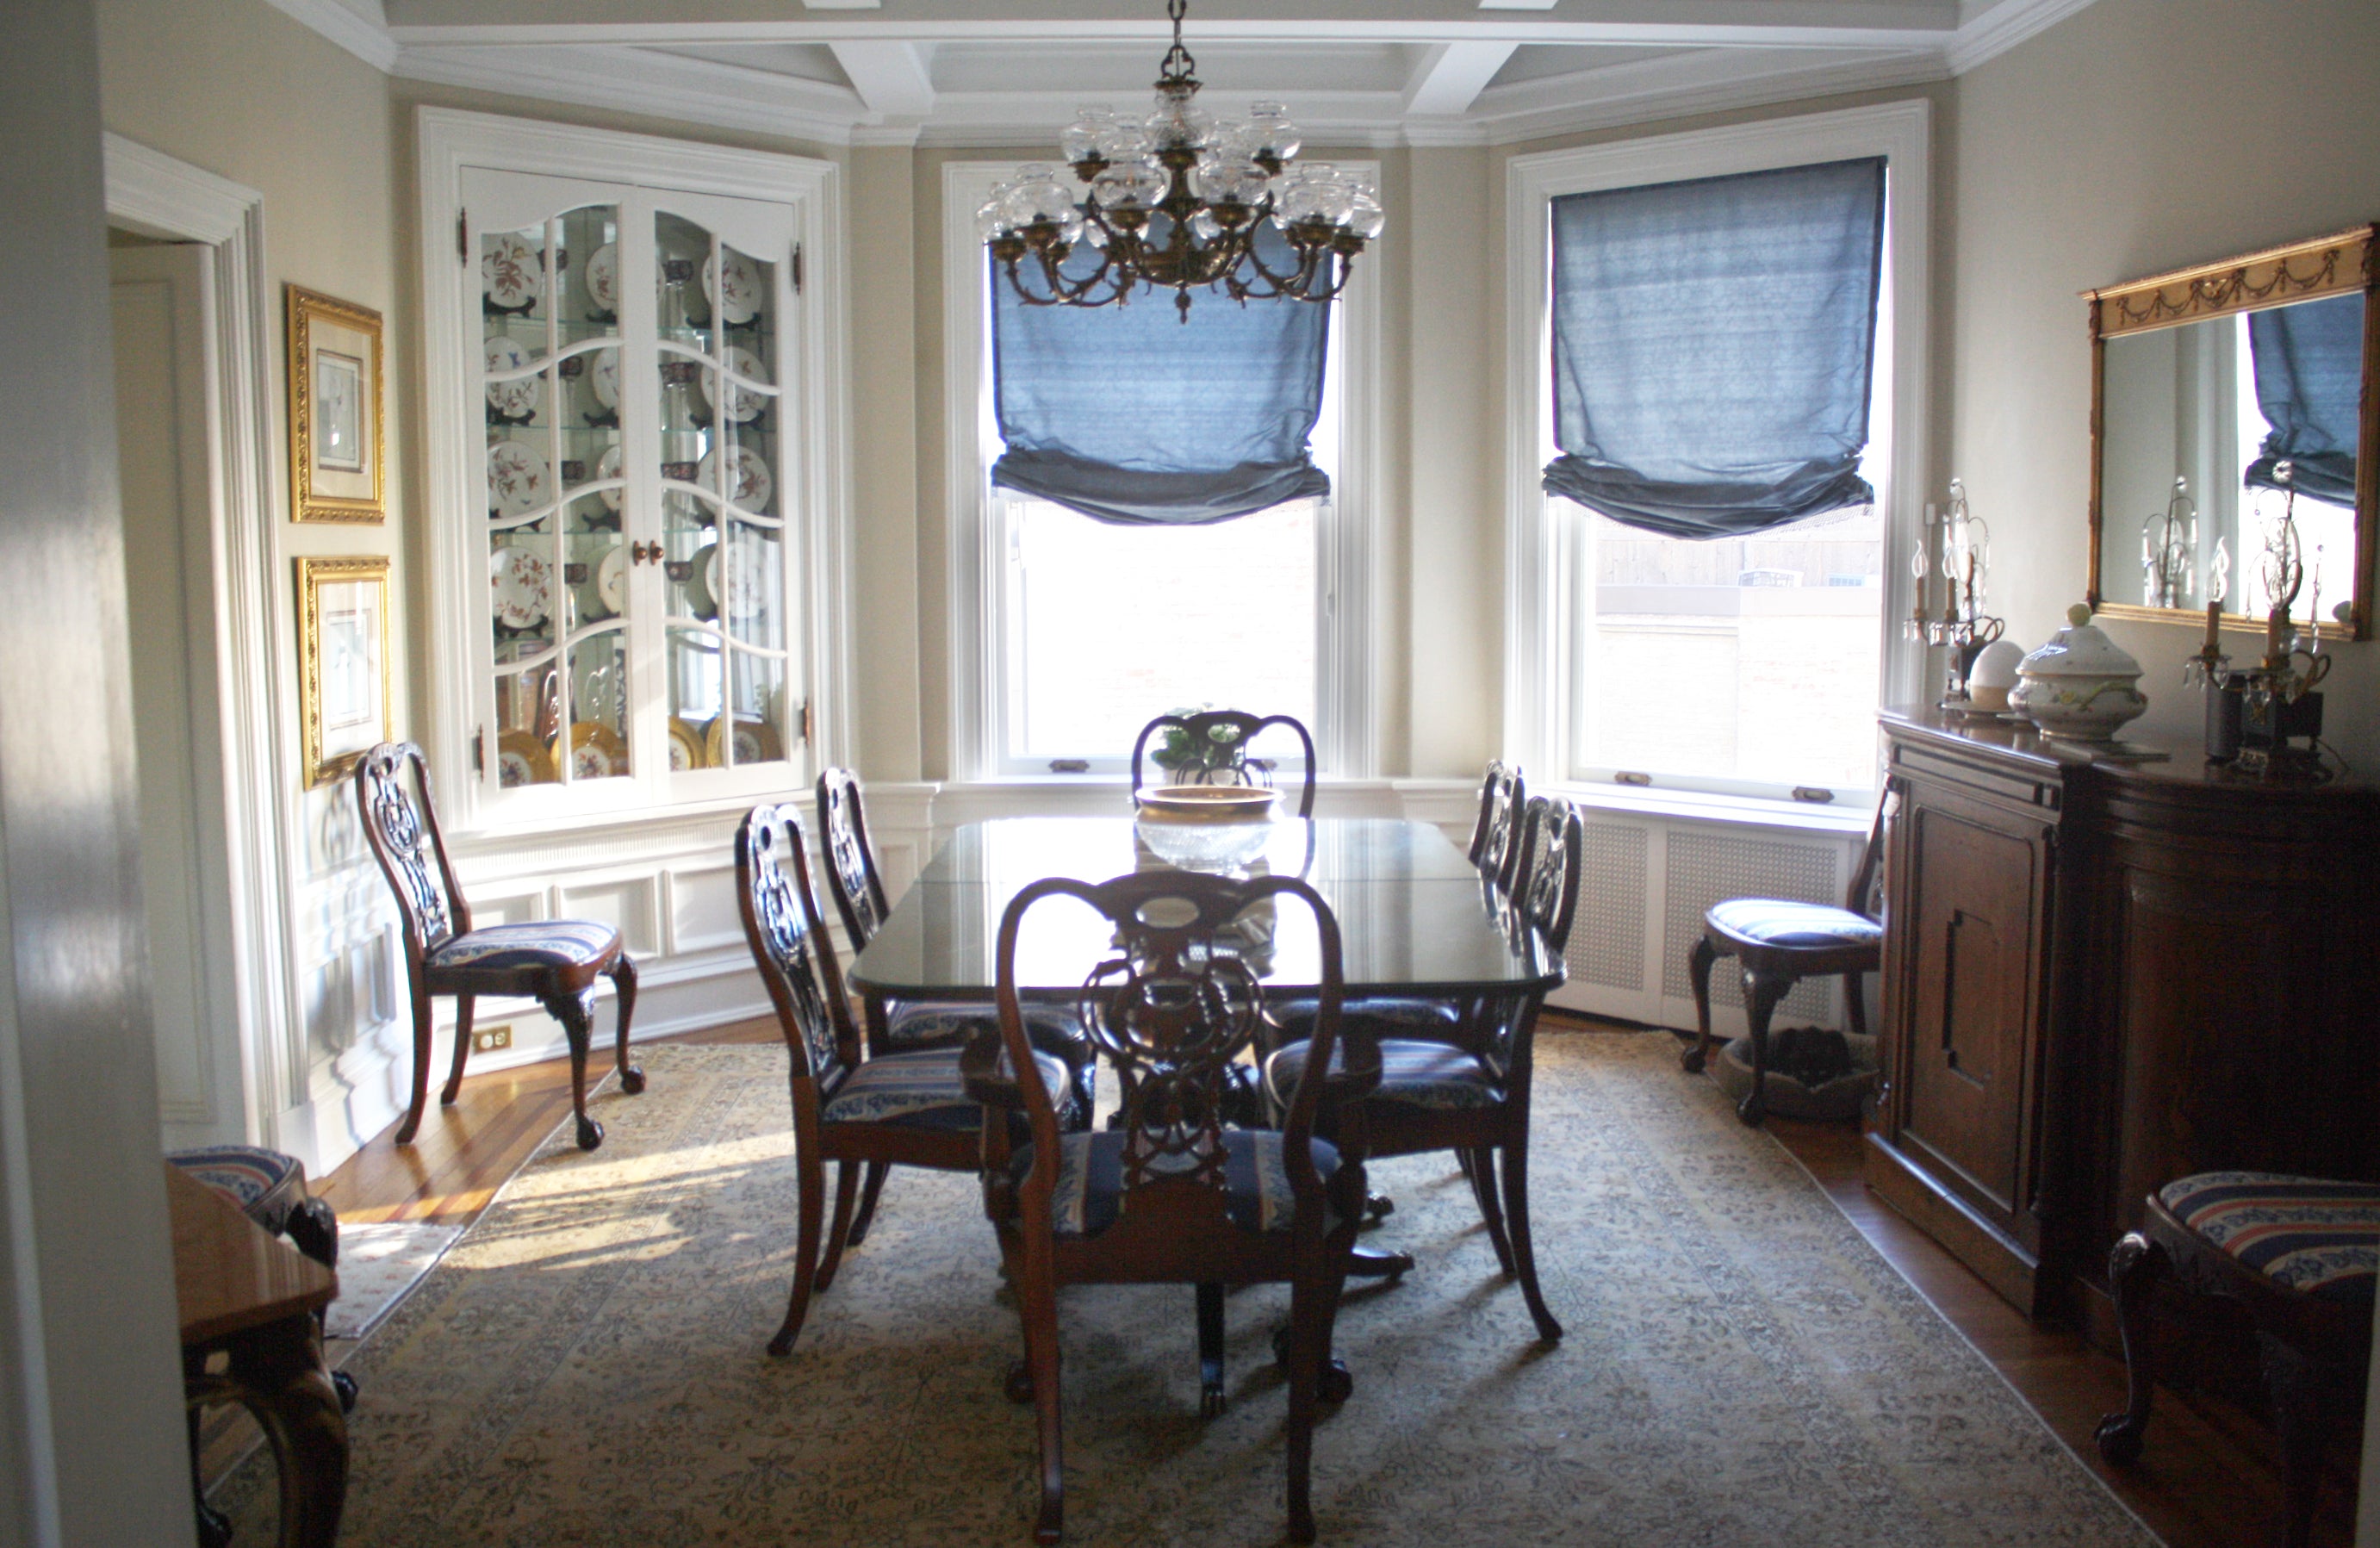 Dining room with persian rug